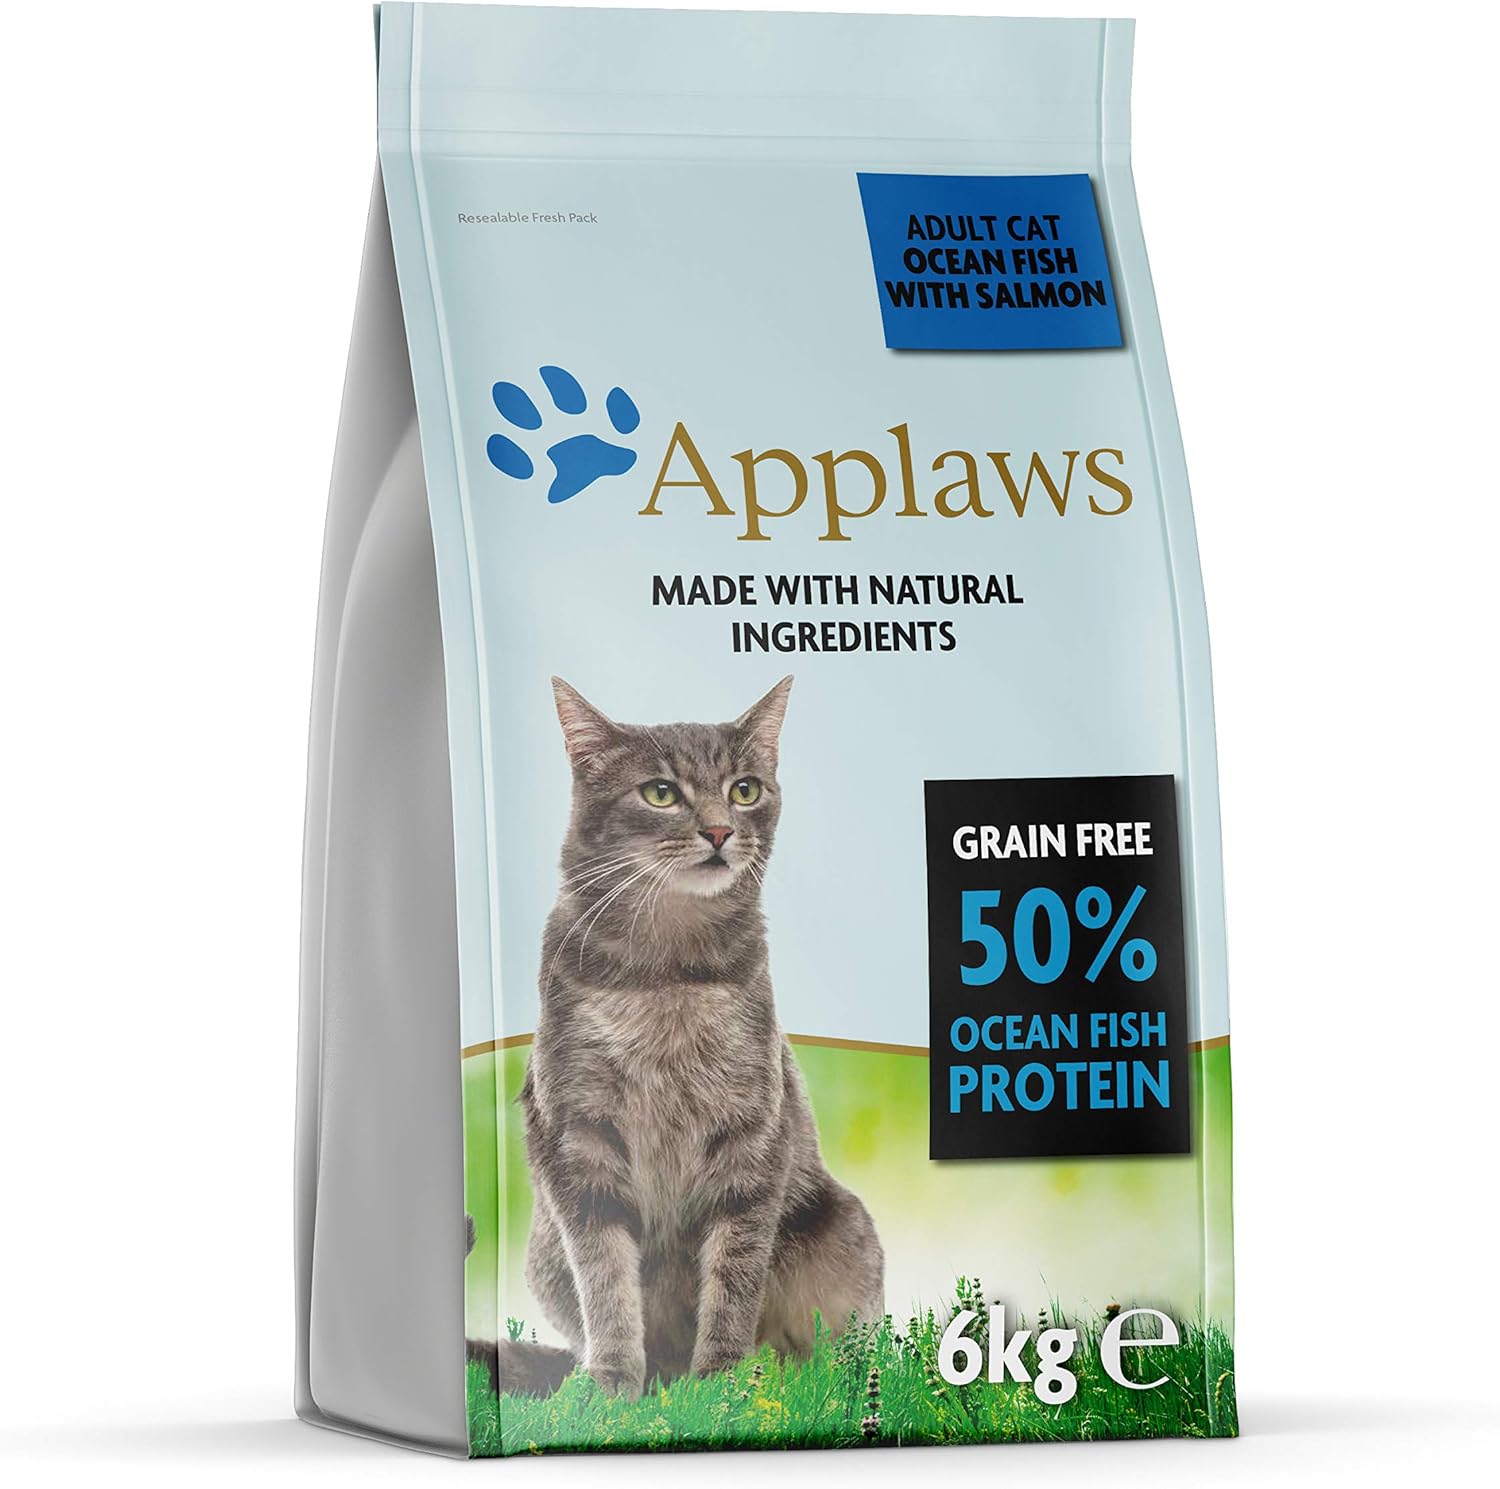 Applaws Complete Natural and Grain Free Dry Adult Cat Food, Ocean Fish with Salmon, 6 kg Bag?6761135